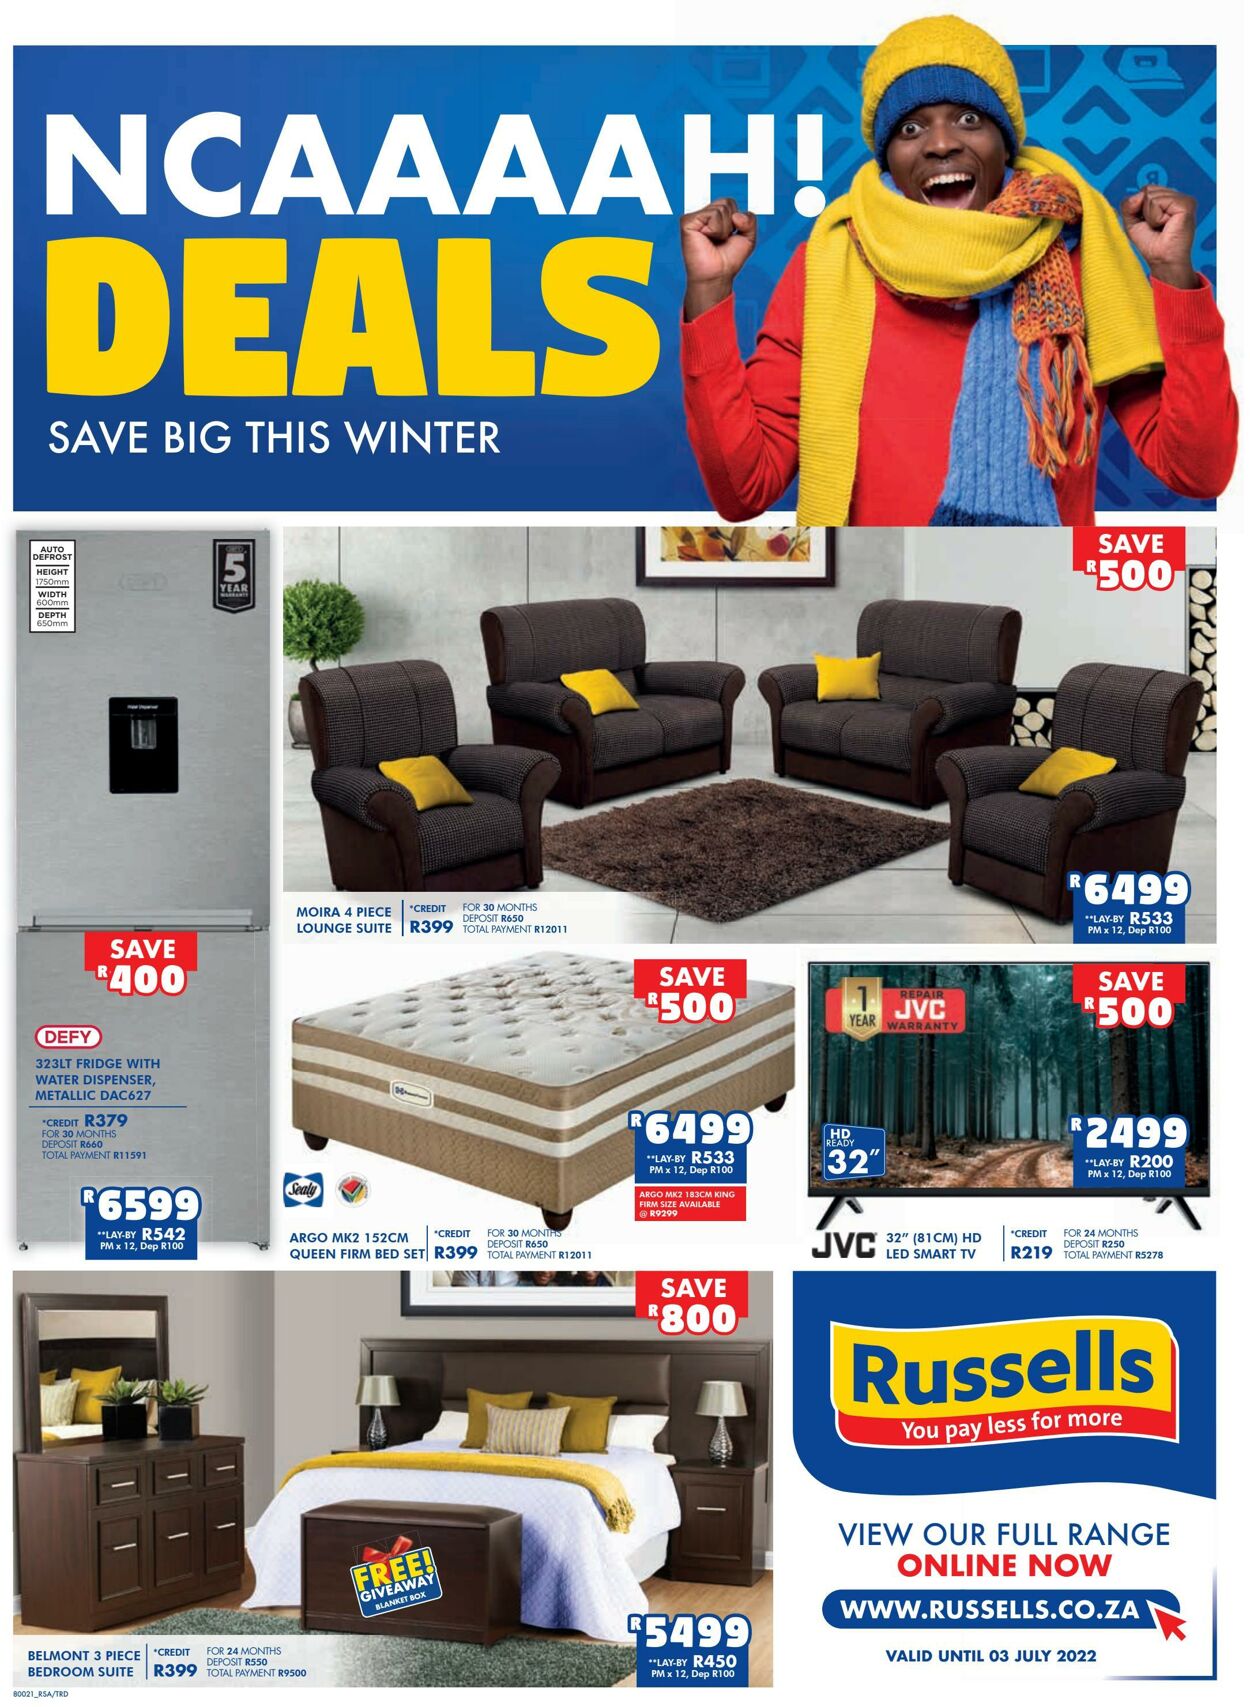 Russells Promotional specials